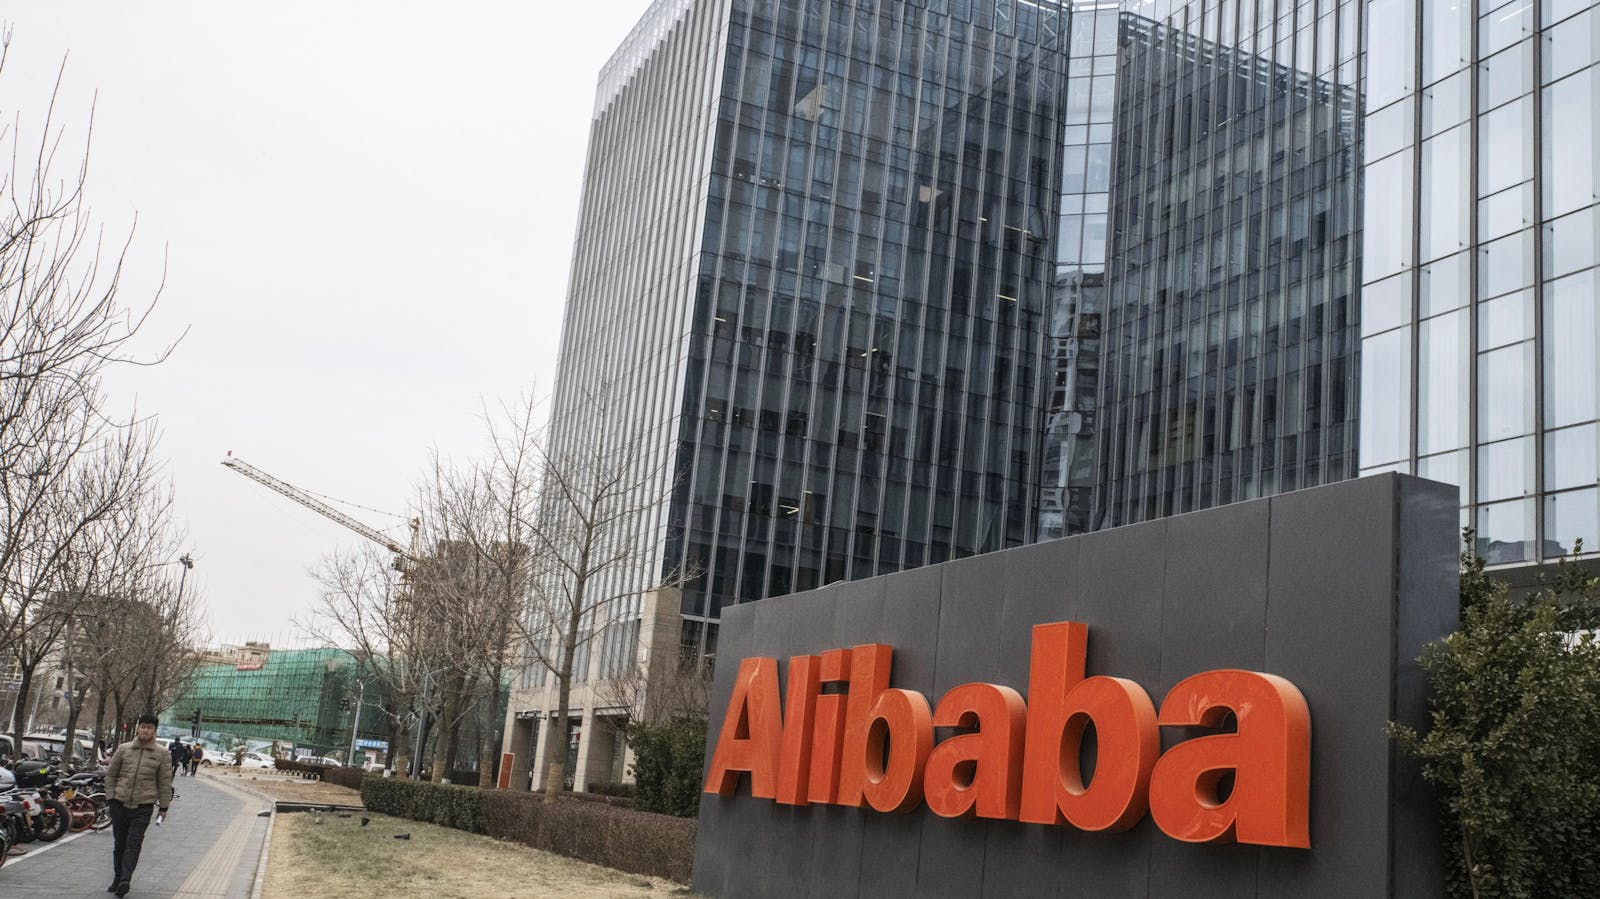 Alibaba's office in Beijing. Photo by Bloomberg